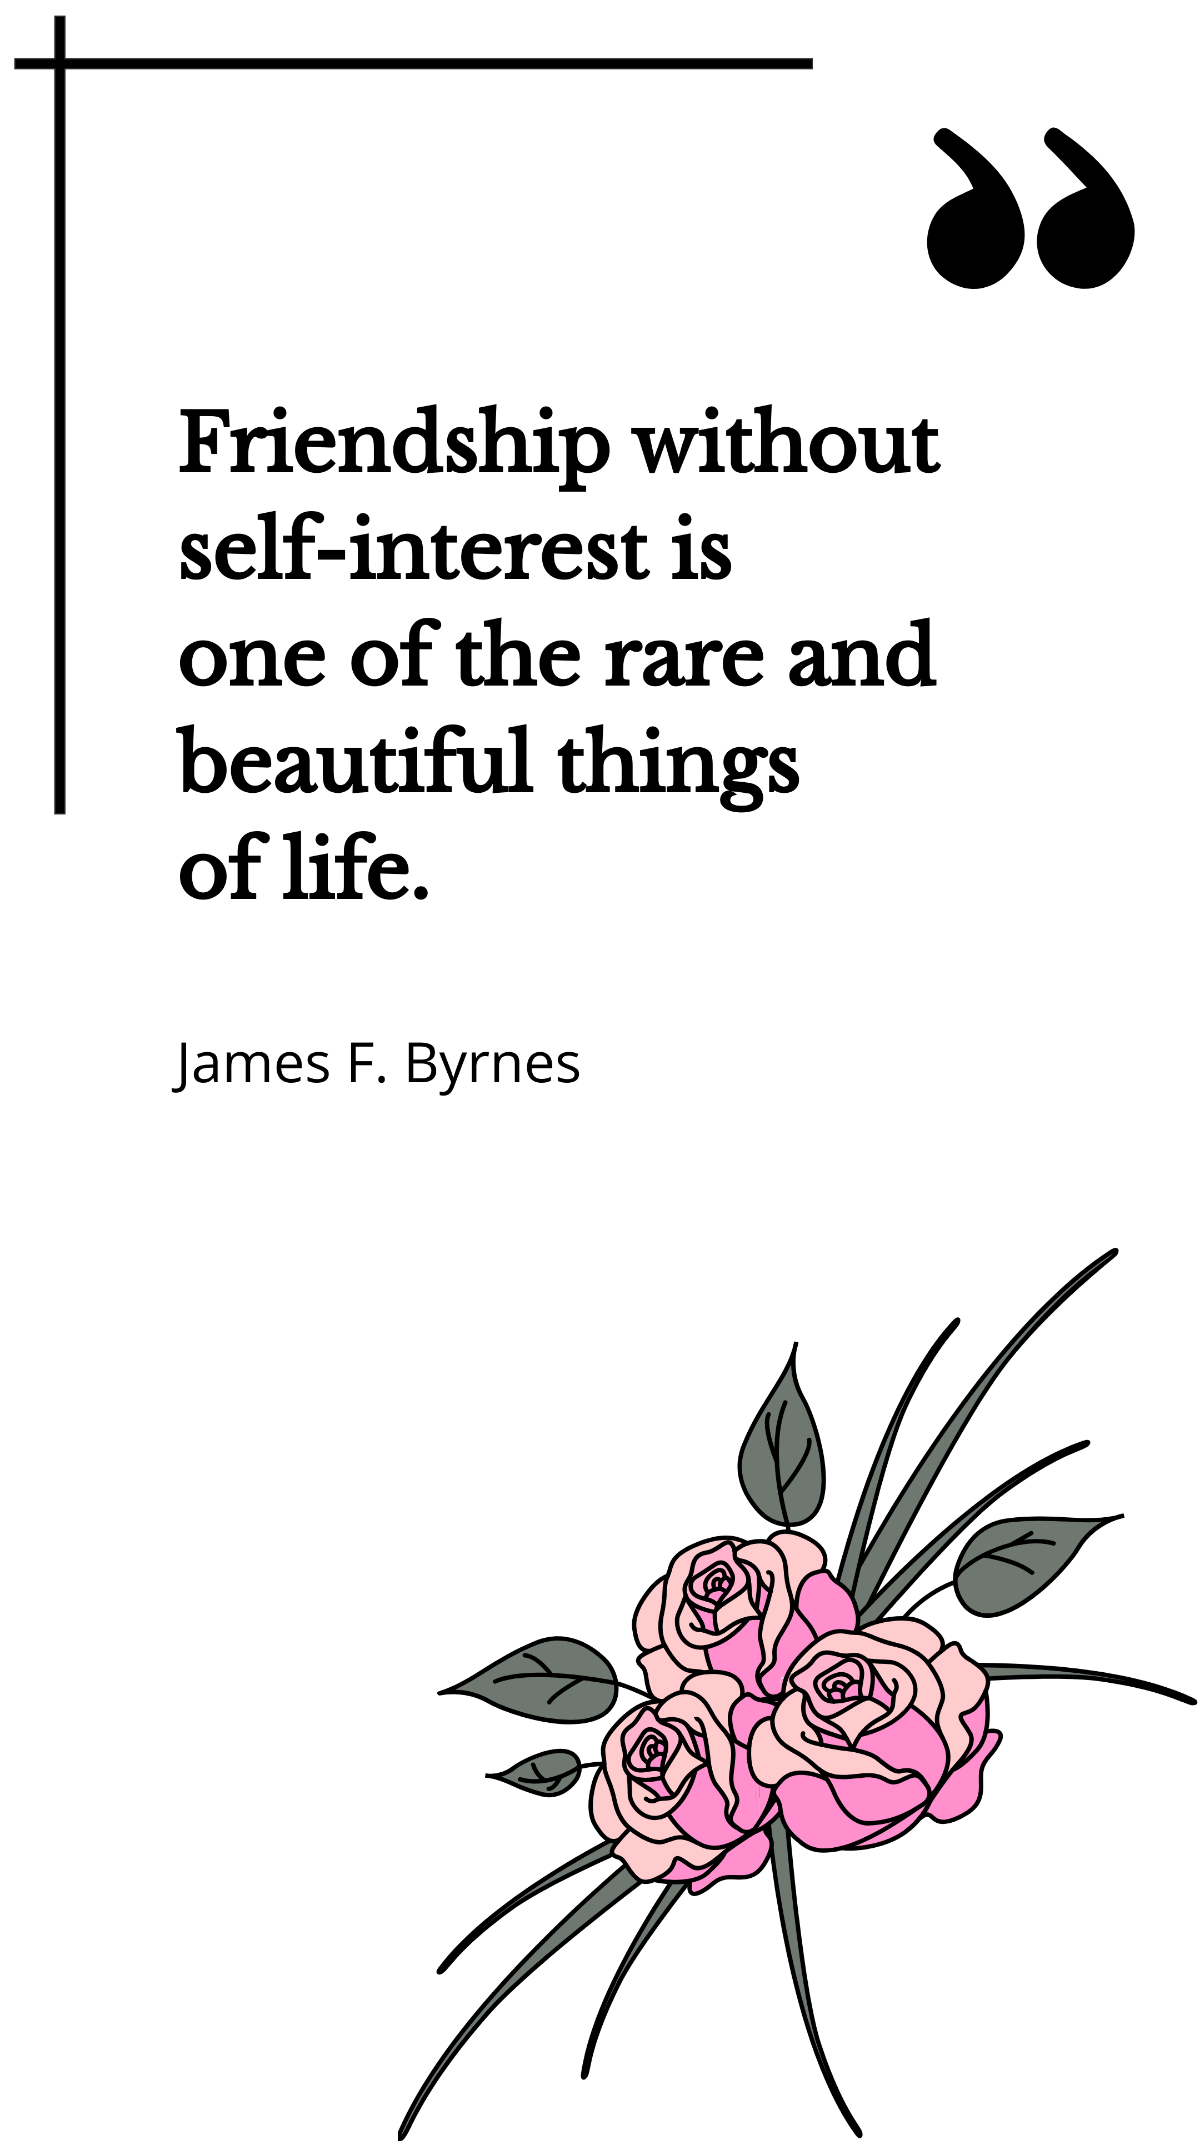 James F. Byrnes - Friendship without self-interest is one of the rare and beautiful things of life. Template